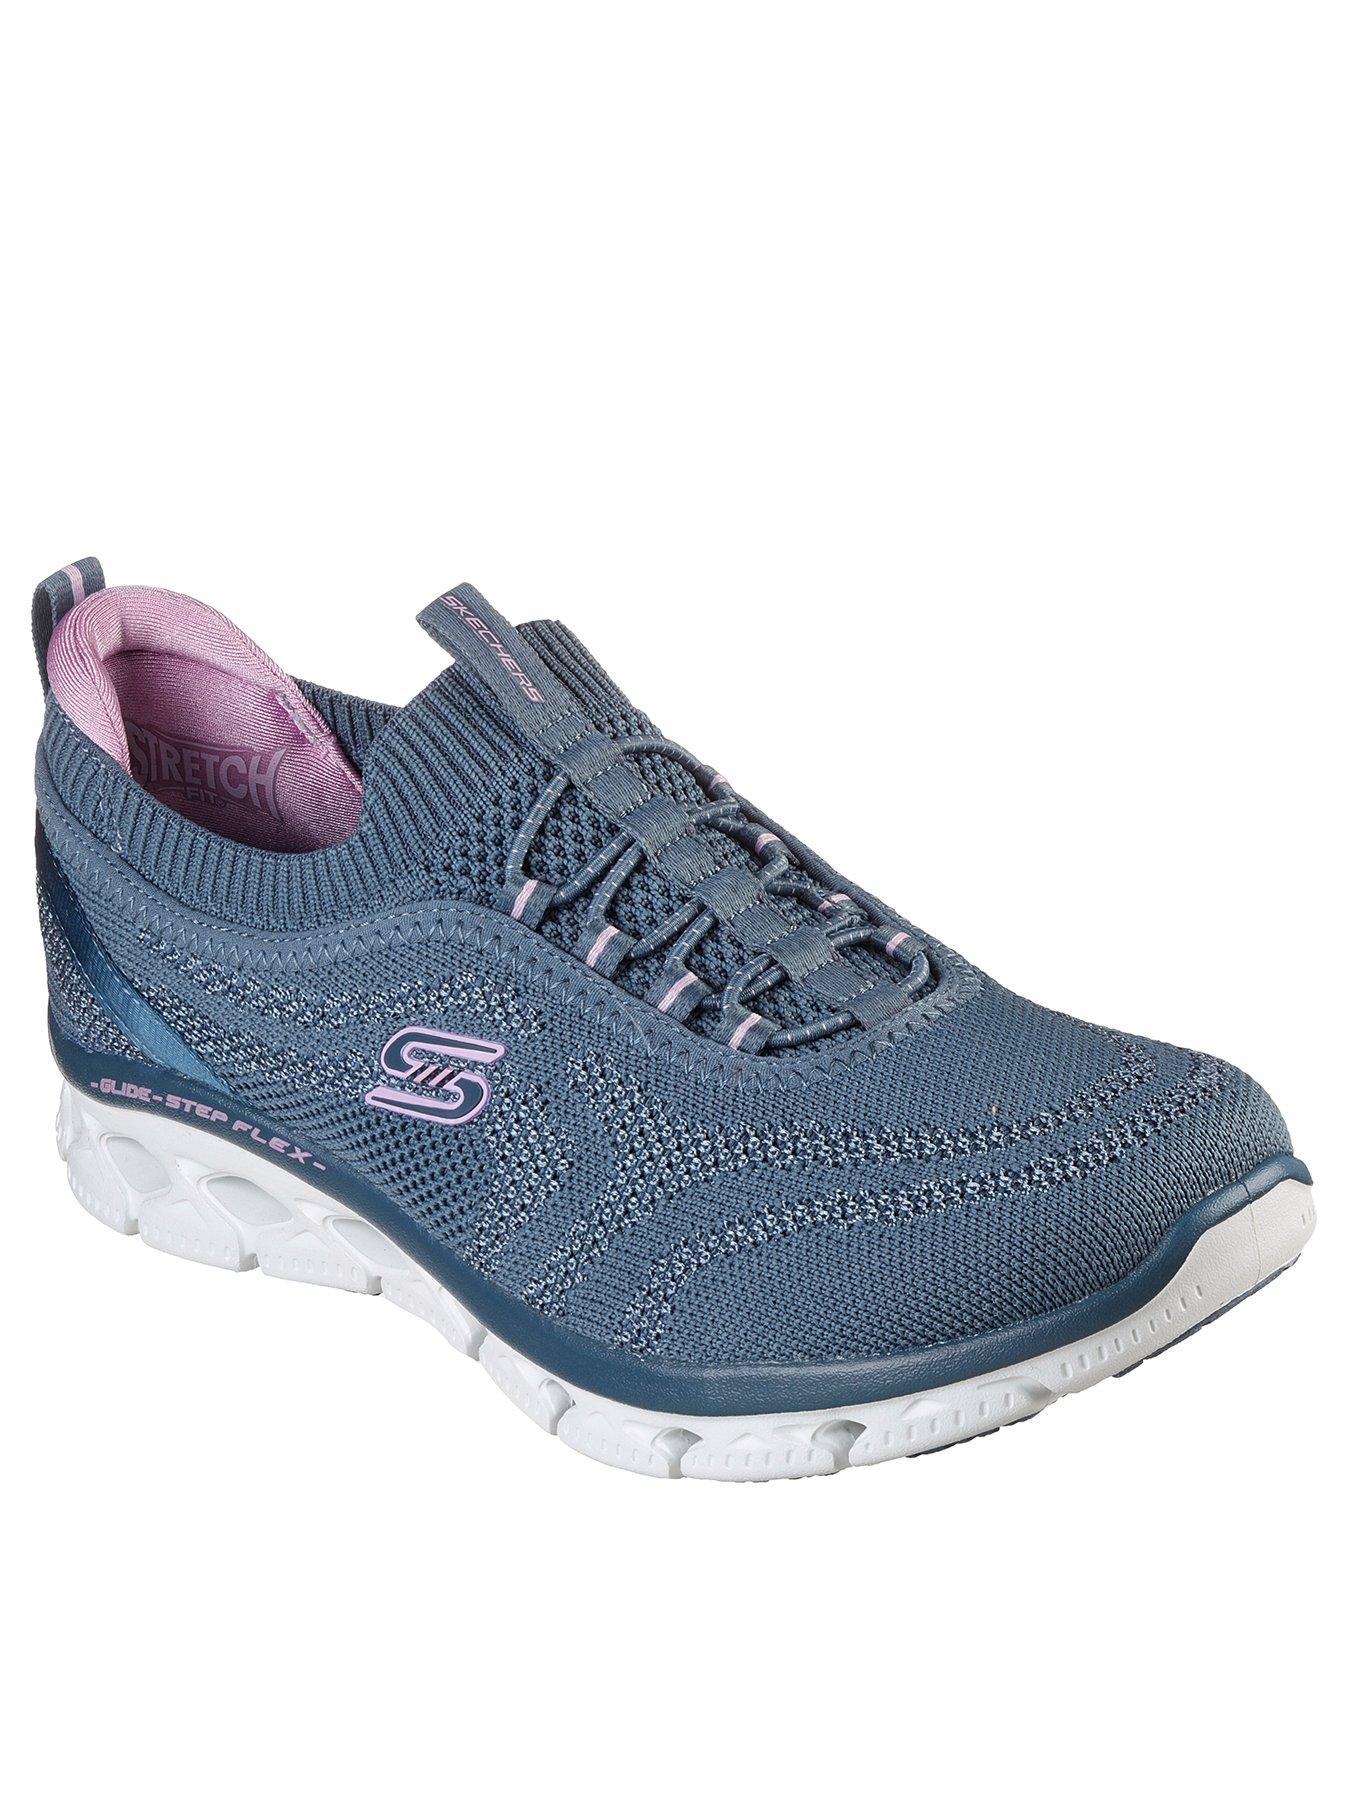 Trainers Glide-step Flex Trainers